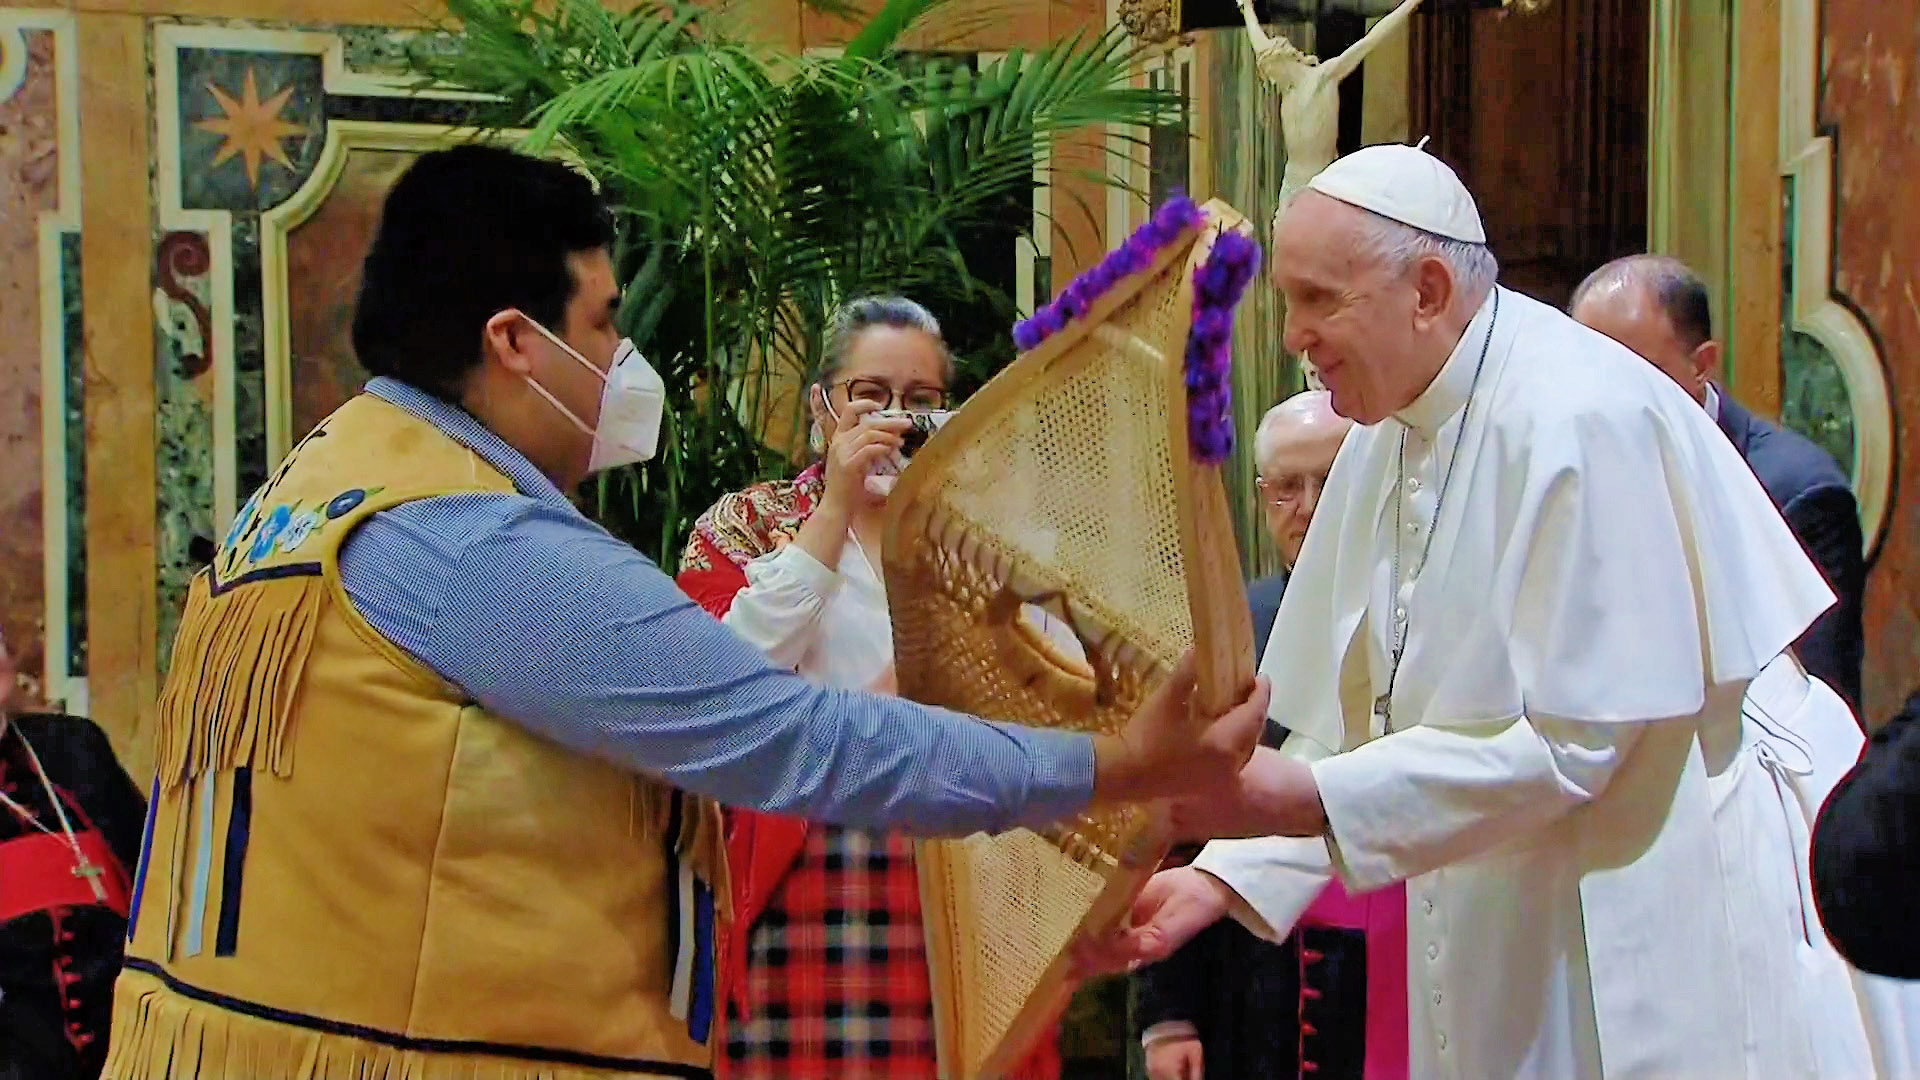 Pope Francis receiving a gift from a member of the Indigenous Delegation to Rome in March/April 2022